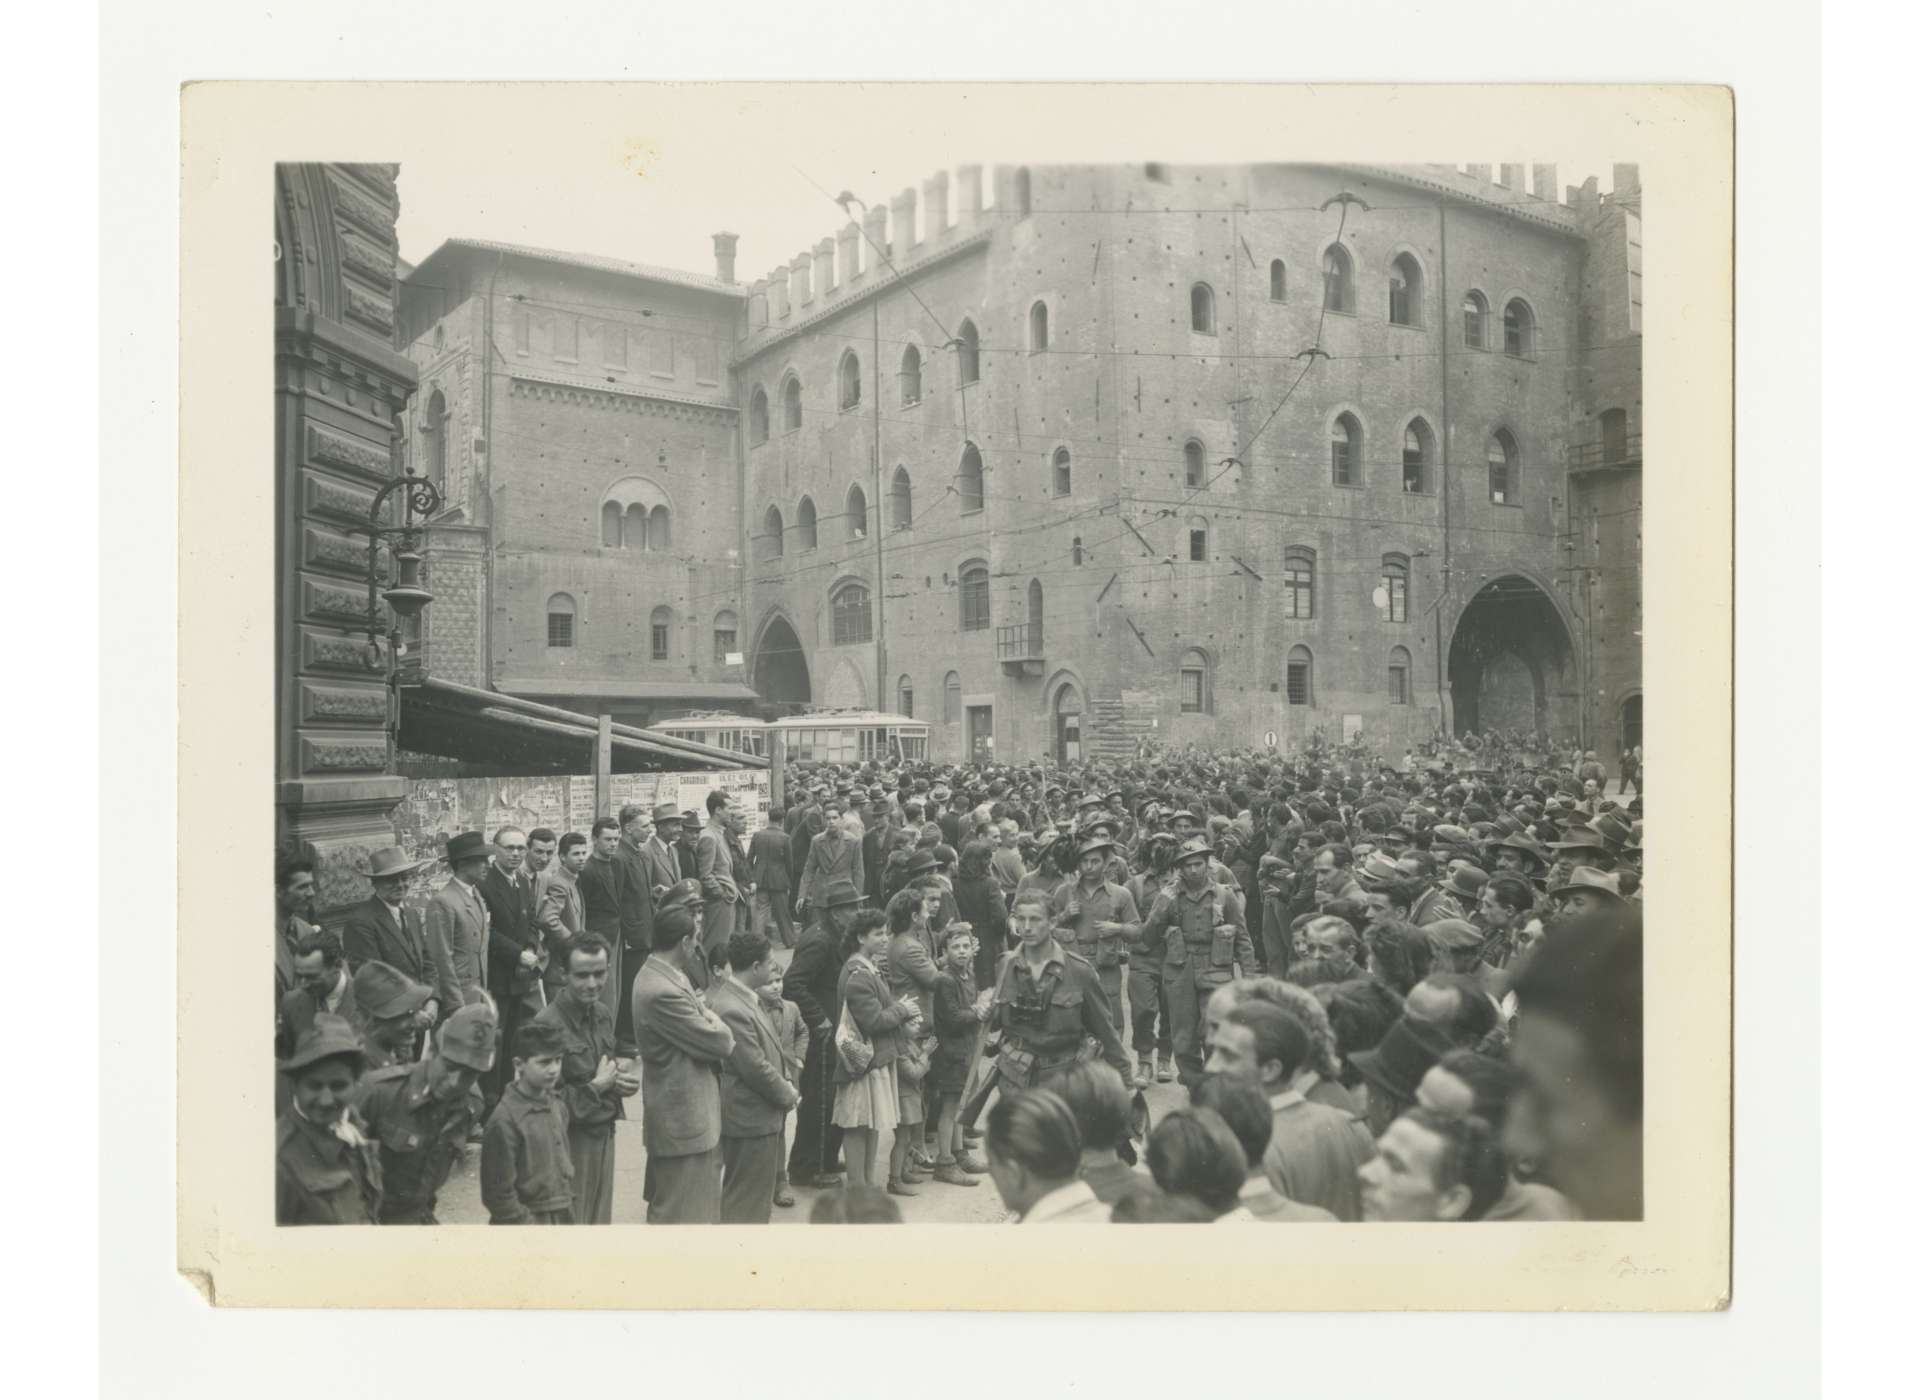 Italian troops serving with US Fifth Army enter liberated Bologna, April 21, 1945. US Army Signal Corps photo, in memory of William F. Caddell, Jr., from the Collection of The National WWII Museum, 2007.048.096.